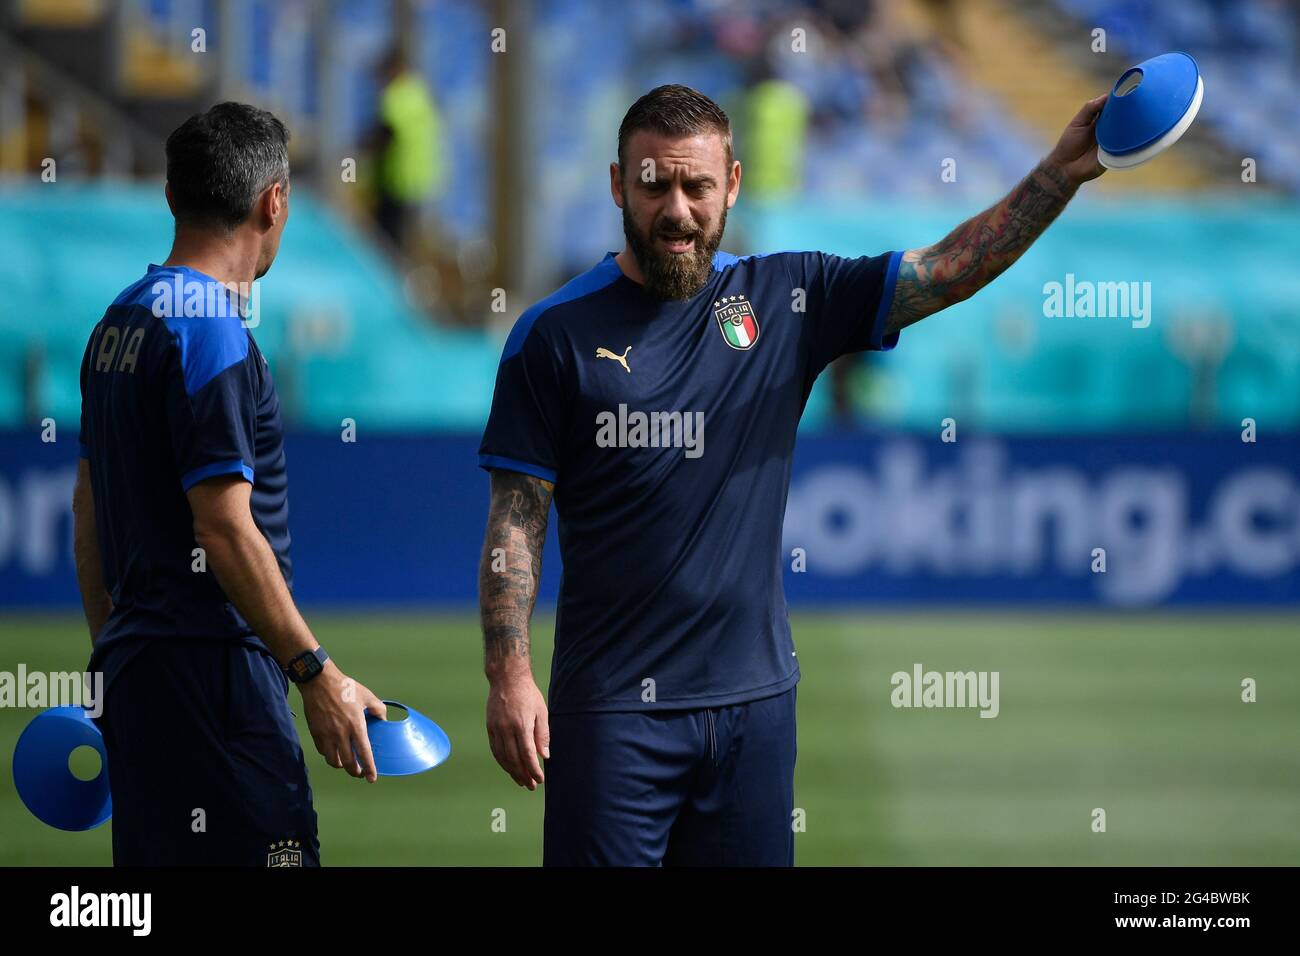 Roma, Italy. 20th June, 2021. Daniele De Rossi during the Uefa Euro 2020 Group A football match between Italy and Wales at stadio Olimpico in Rome (Italy), June 20th, 2021. Photo Andrea Staccioli/Insidefoto Credit: insidefoto srl/Alamy Live News Stock Photo